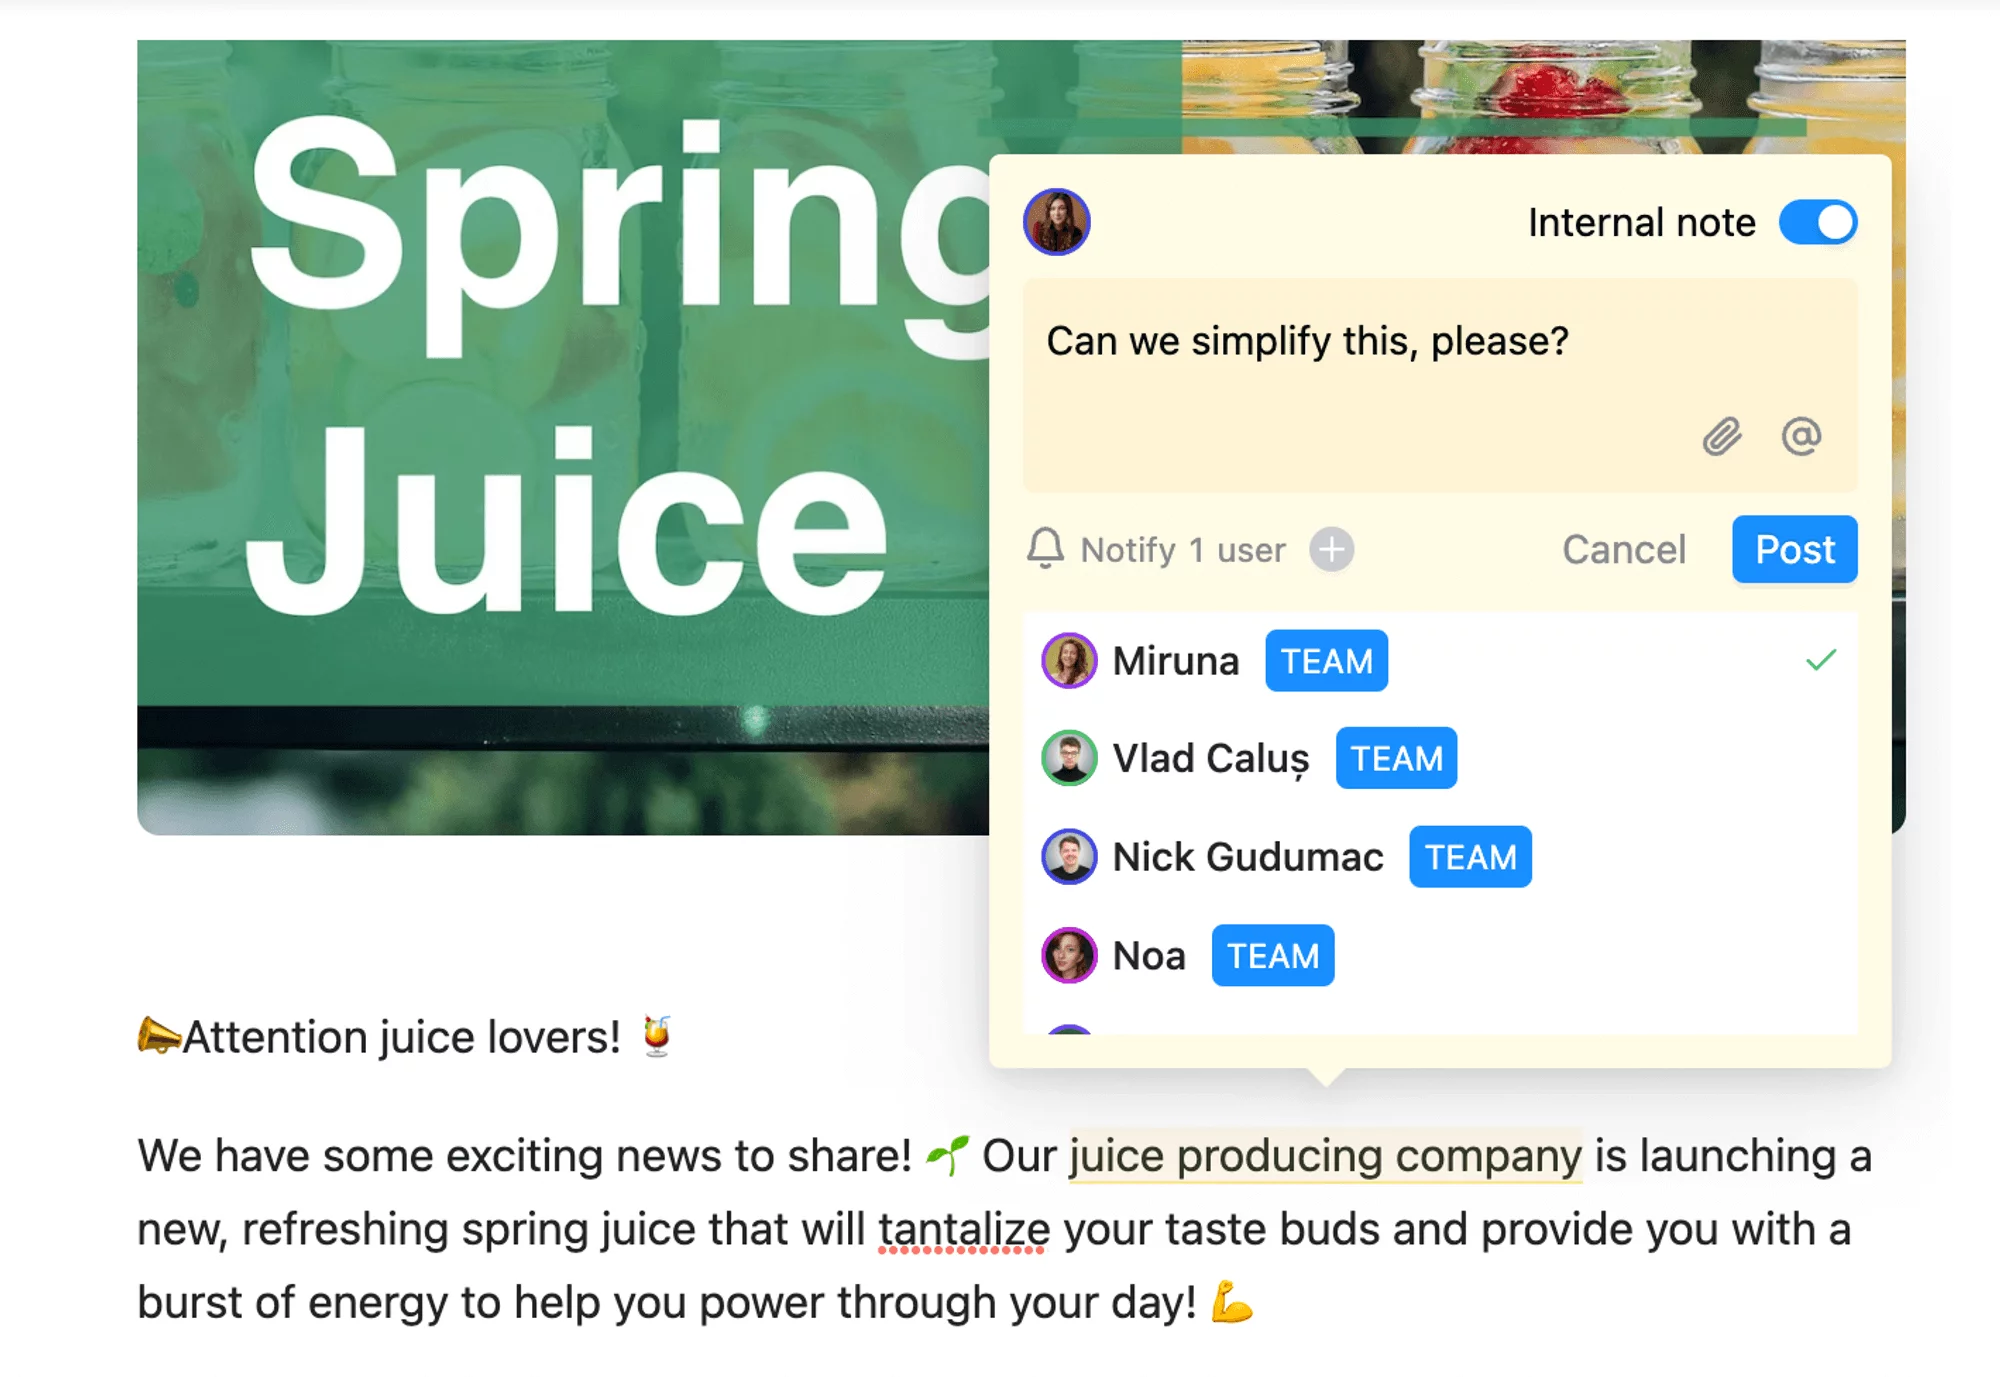 Collaboration upon a social media post prepared in Planable with a team chat box requesting simplification of the message, with the 'Internal note' toggled to give access only to team members 